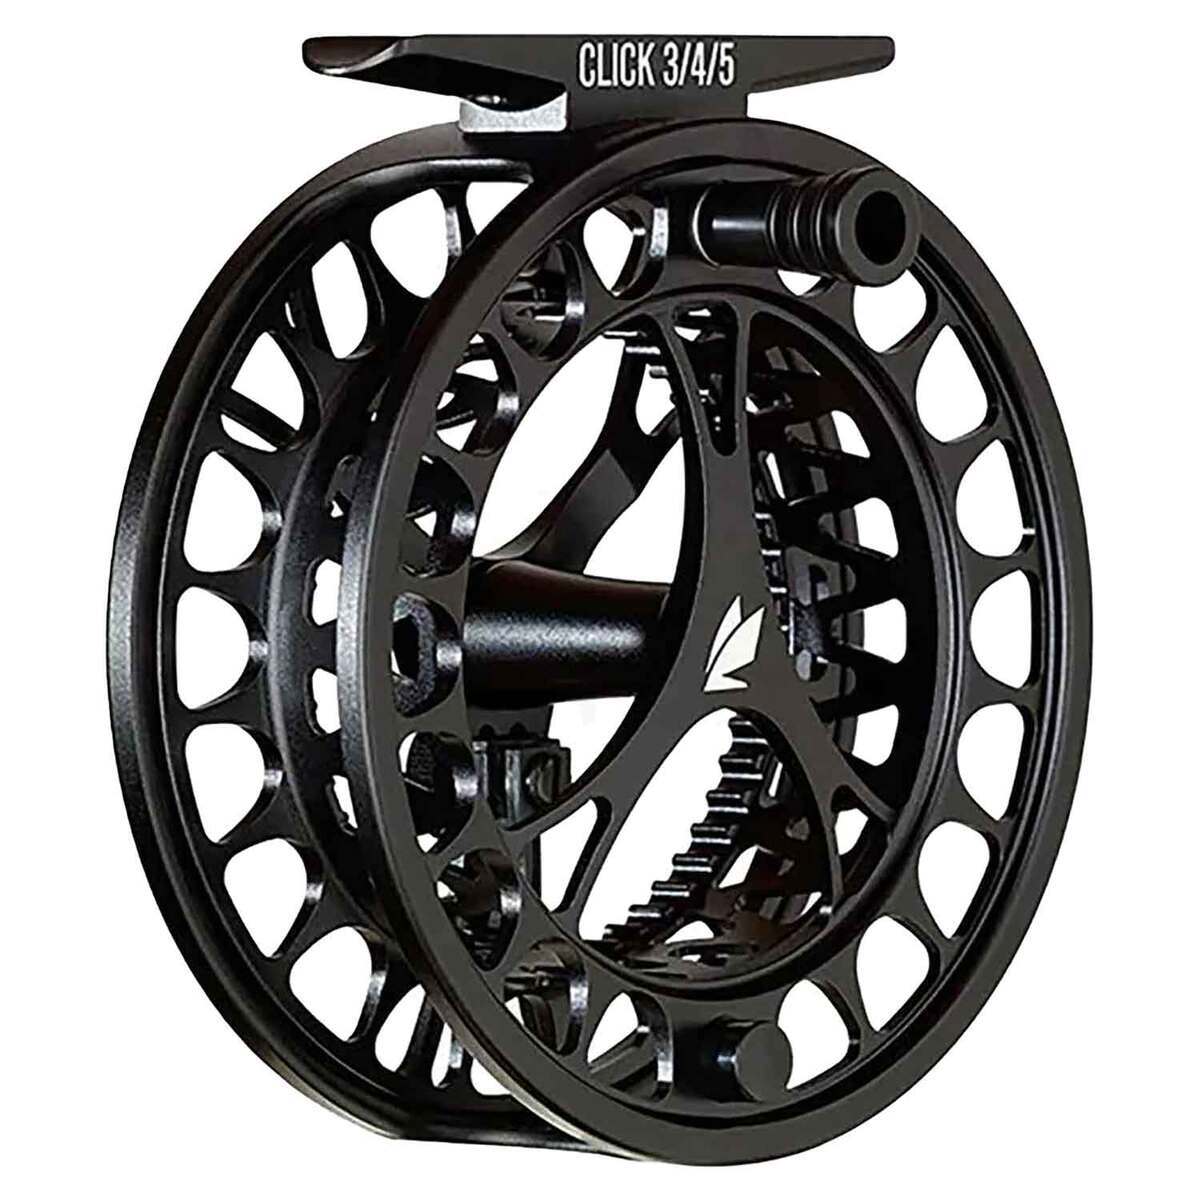 Sage Click Series Fly Fishing Reel - 3-5wt, Stealth